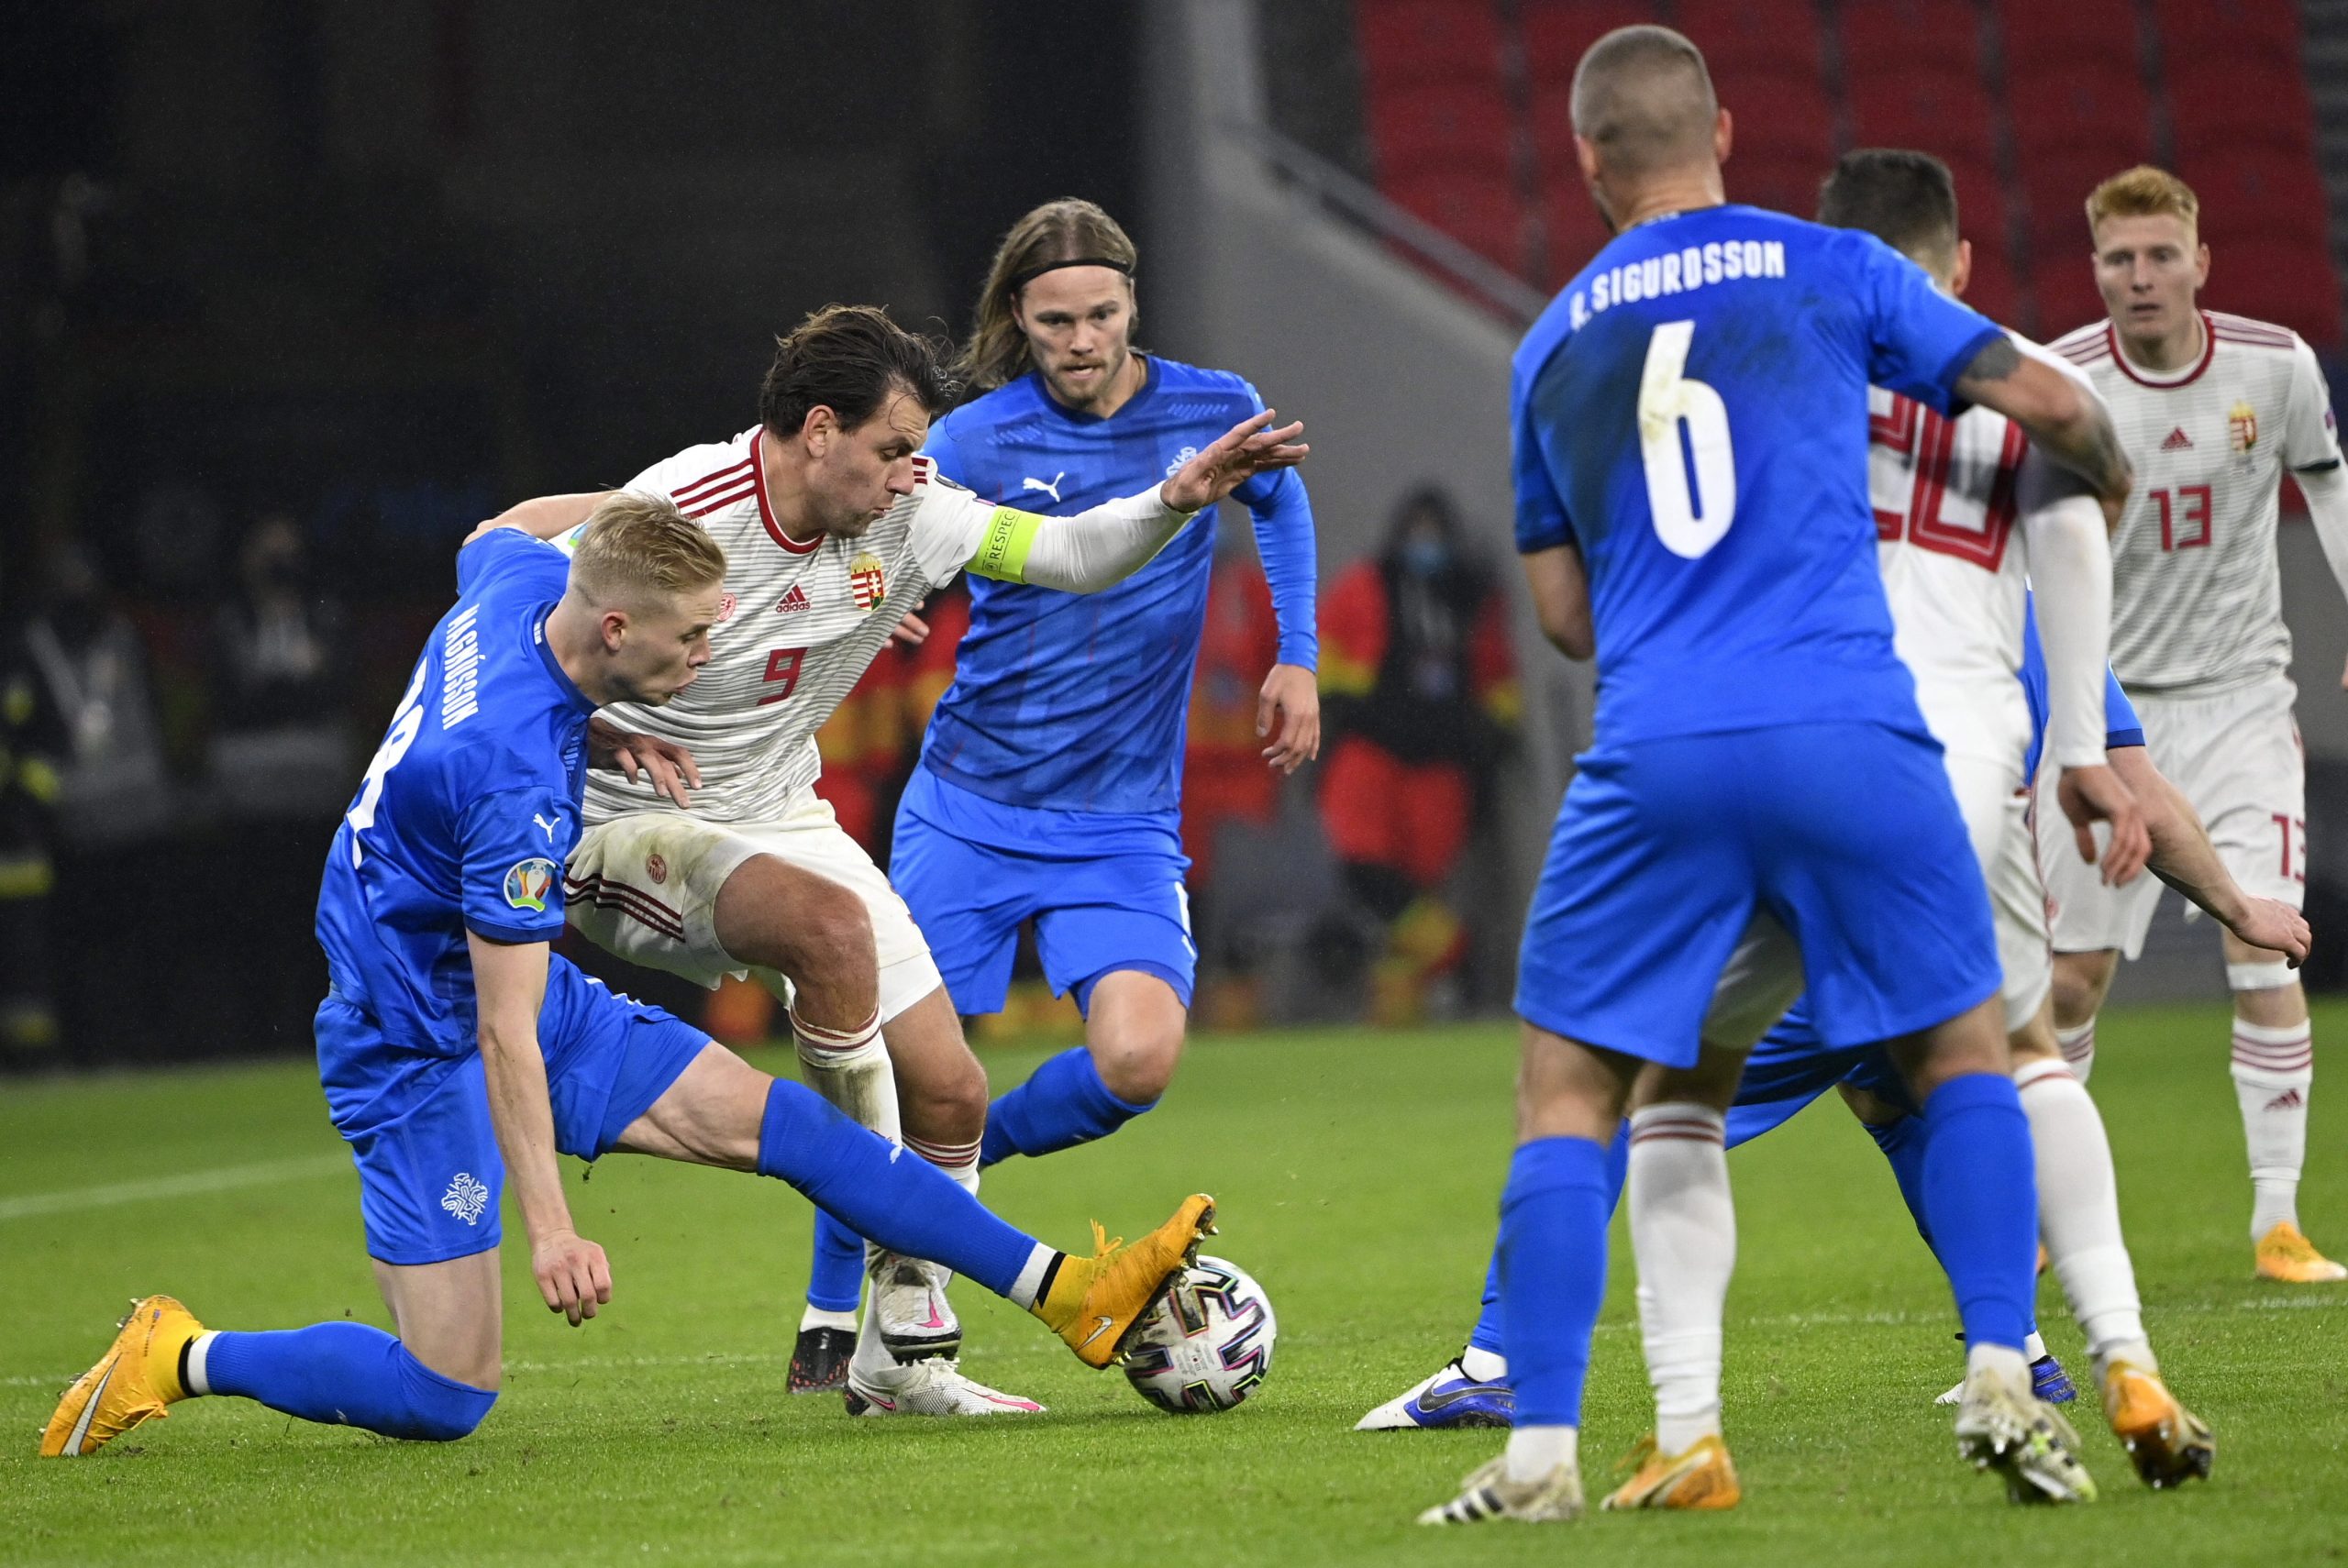 epa08816519 Hordur Magnusson (L) and Birkir Bjarnason (3RD L) of Iceland challenge Adam Szalai of Hungary for the ball during the soccer UEFA EURO 2020 qualification play-off match Hungary vs. Iceland in Puskas Arena in Budapest, Hungary, 12 November 2020.  EPA/Zsolt Szigetvary HUNGARY OUT